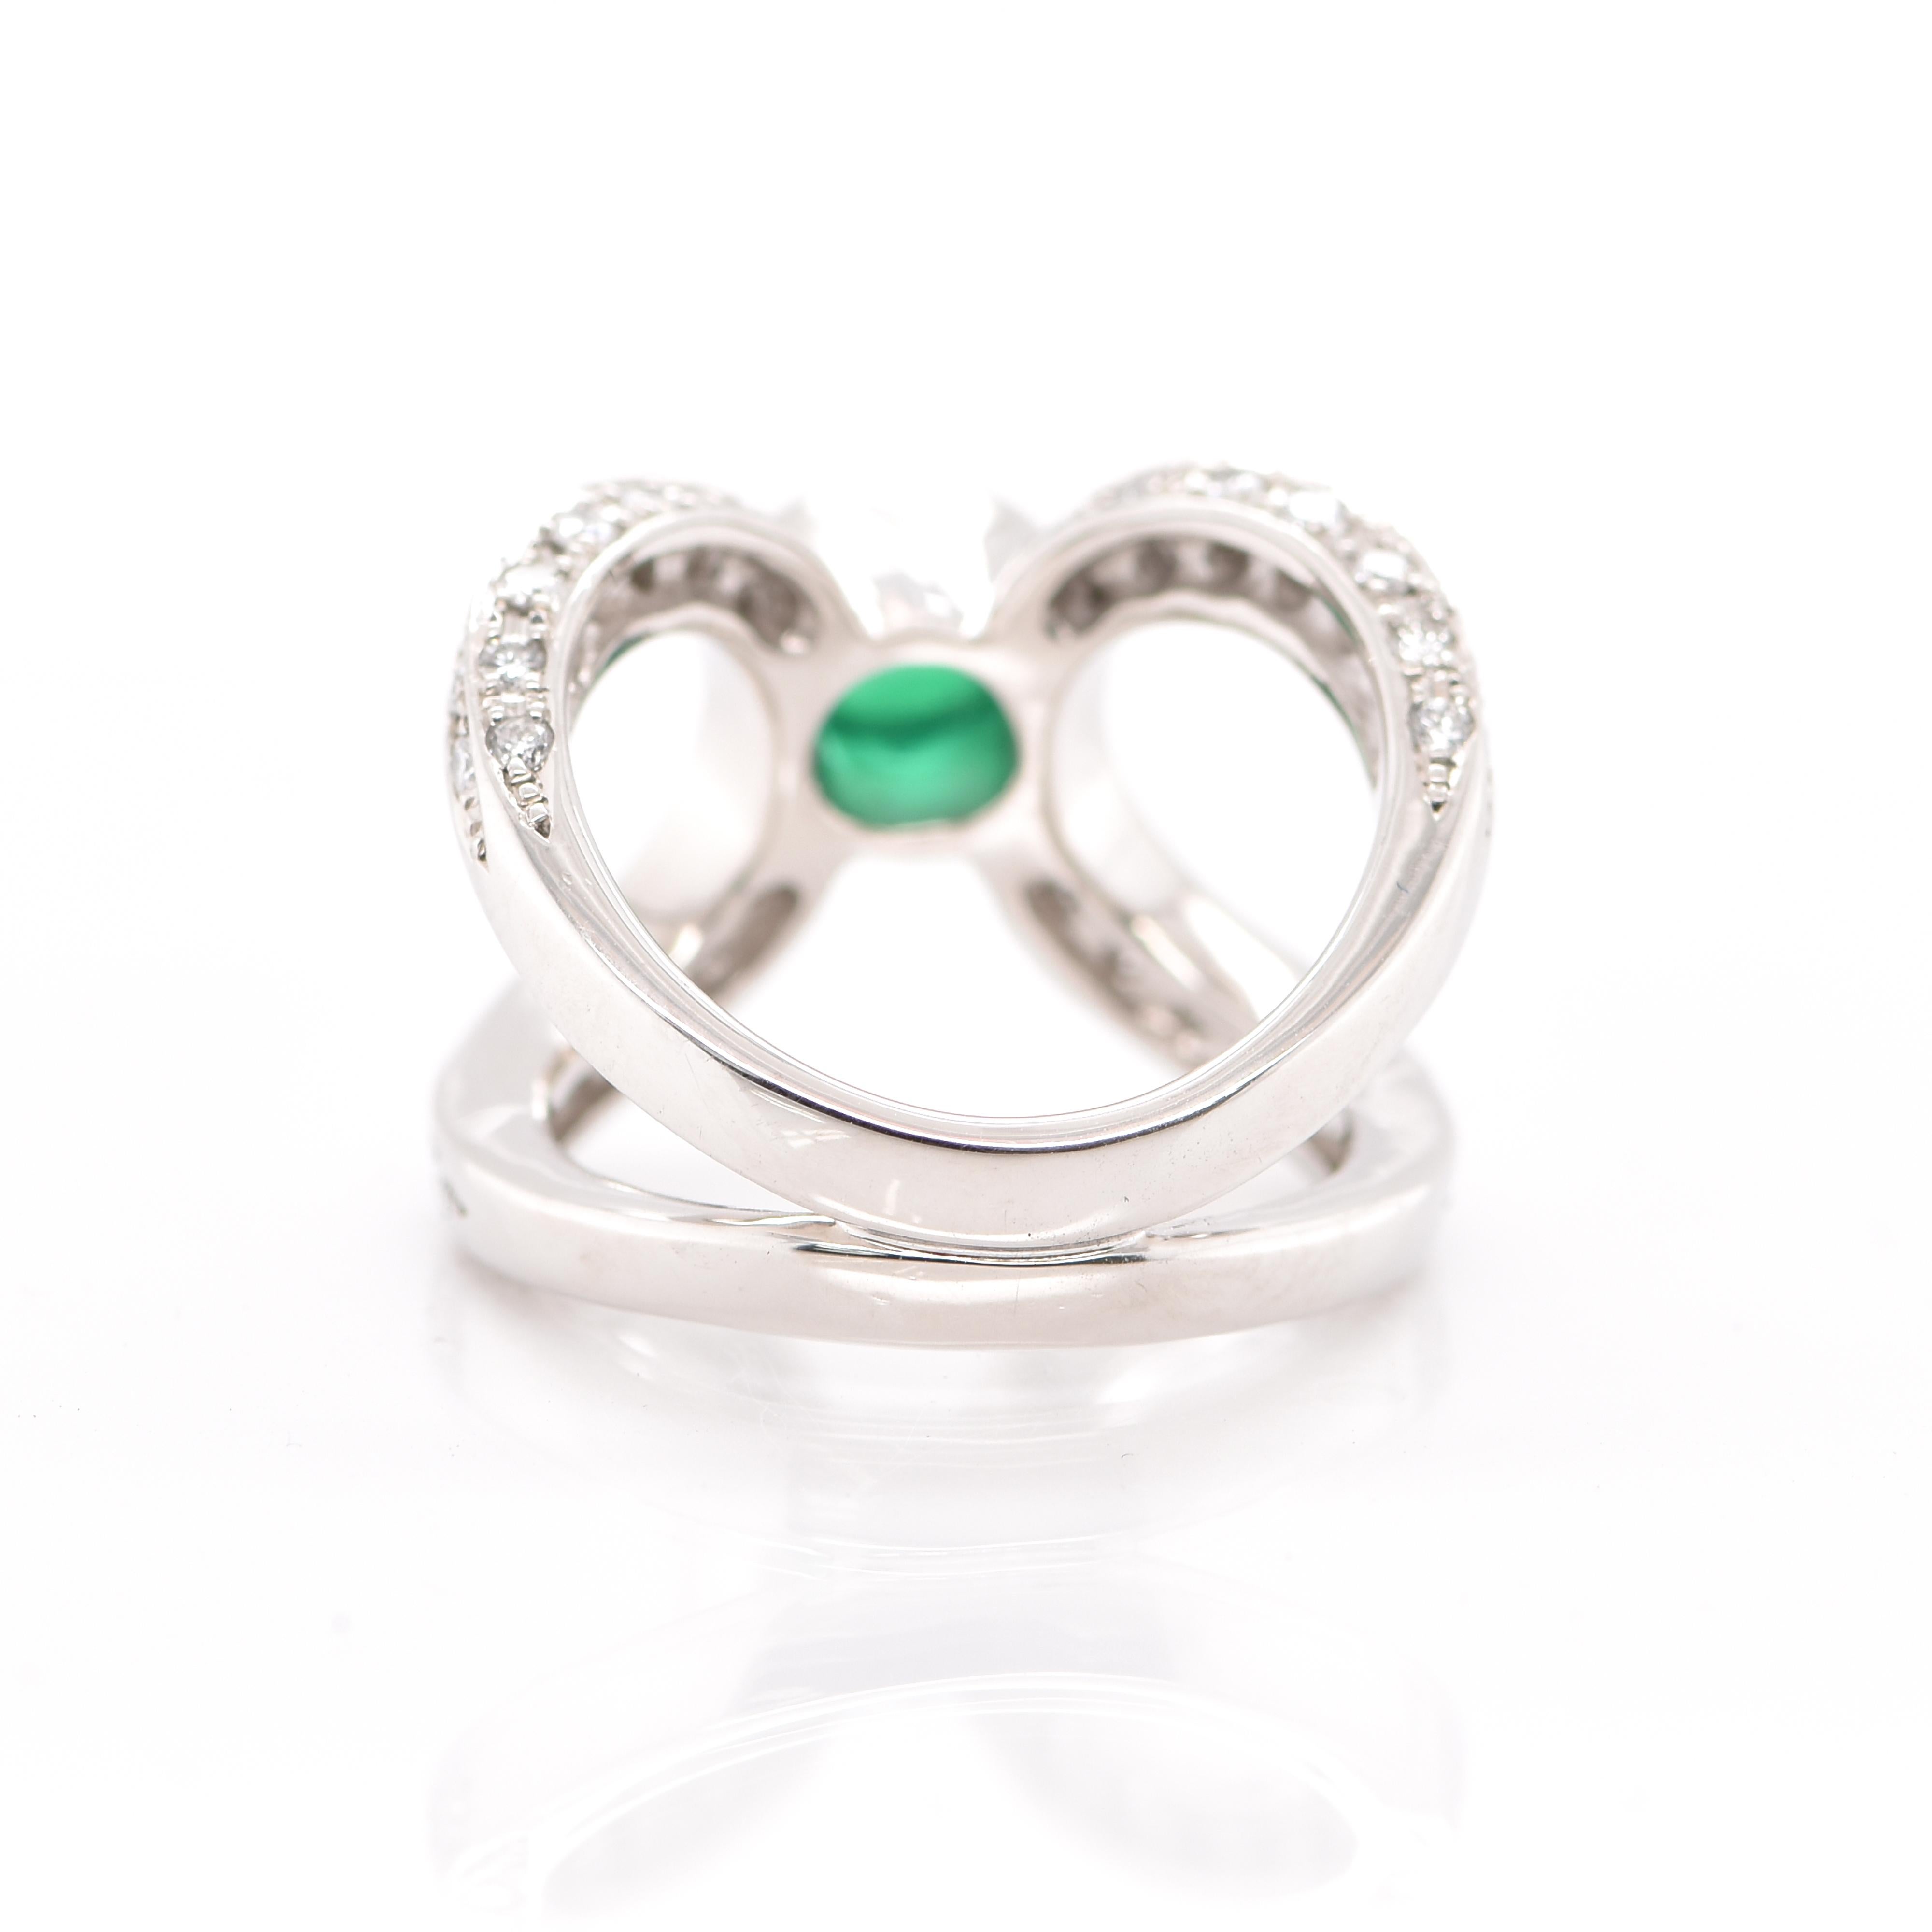 0.86 Carat Natural Emerald Cabochon and Diamond Ring Set in Platinum For Sale 1